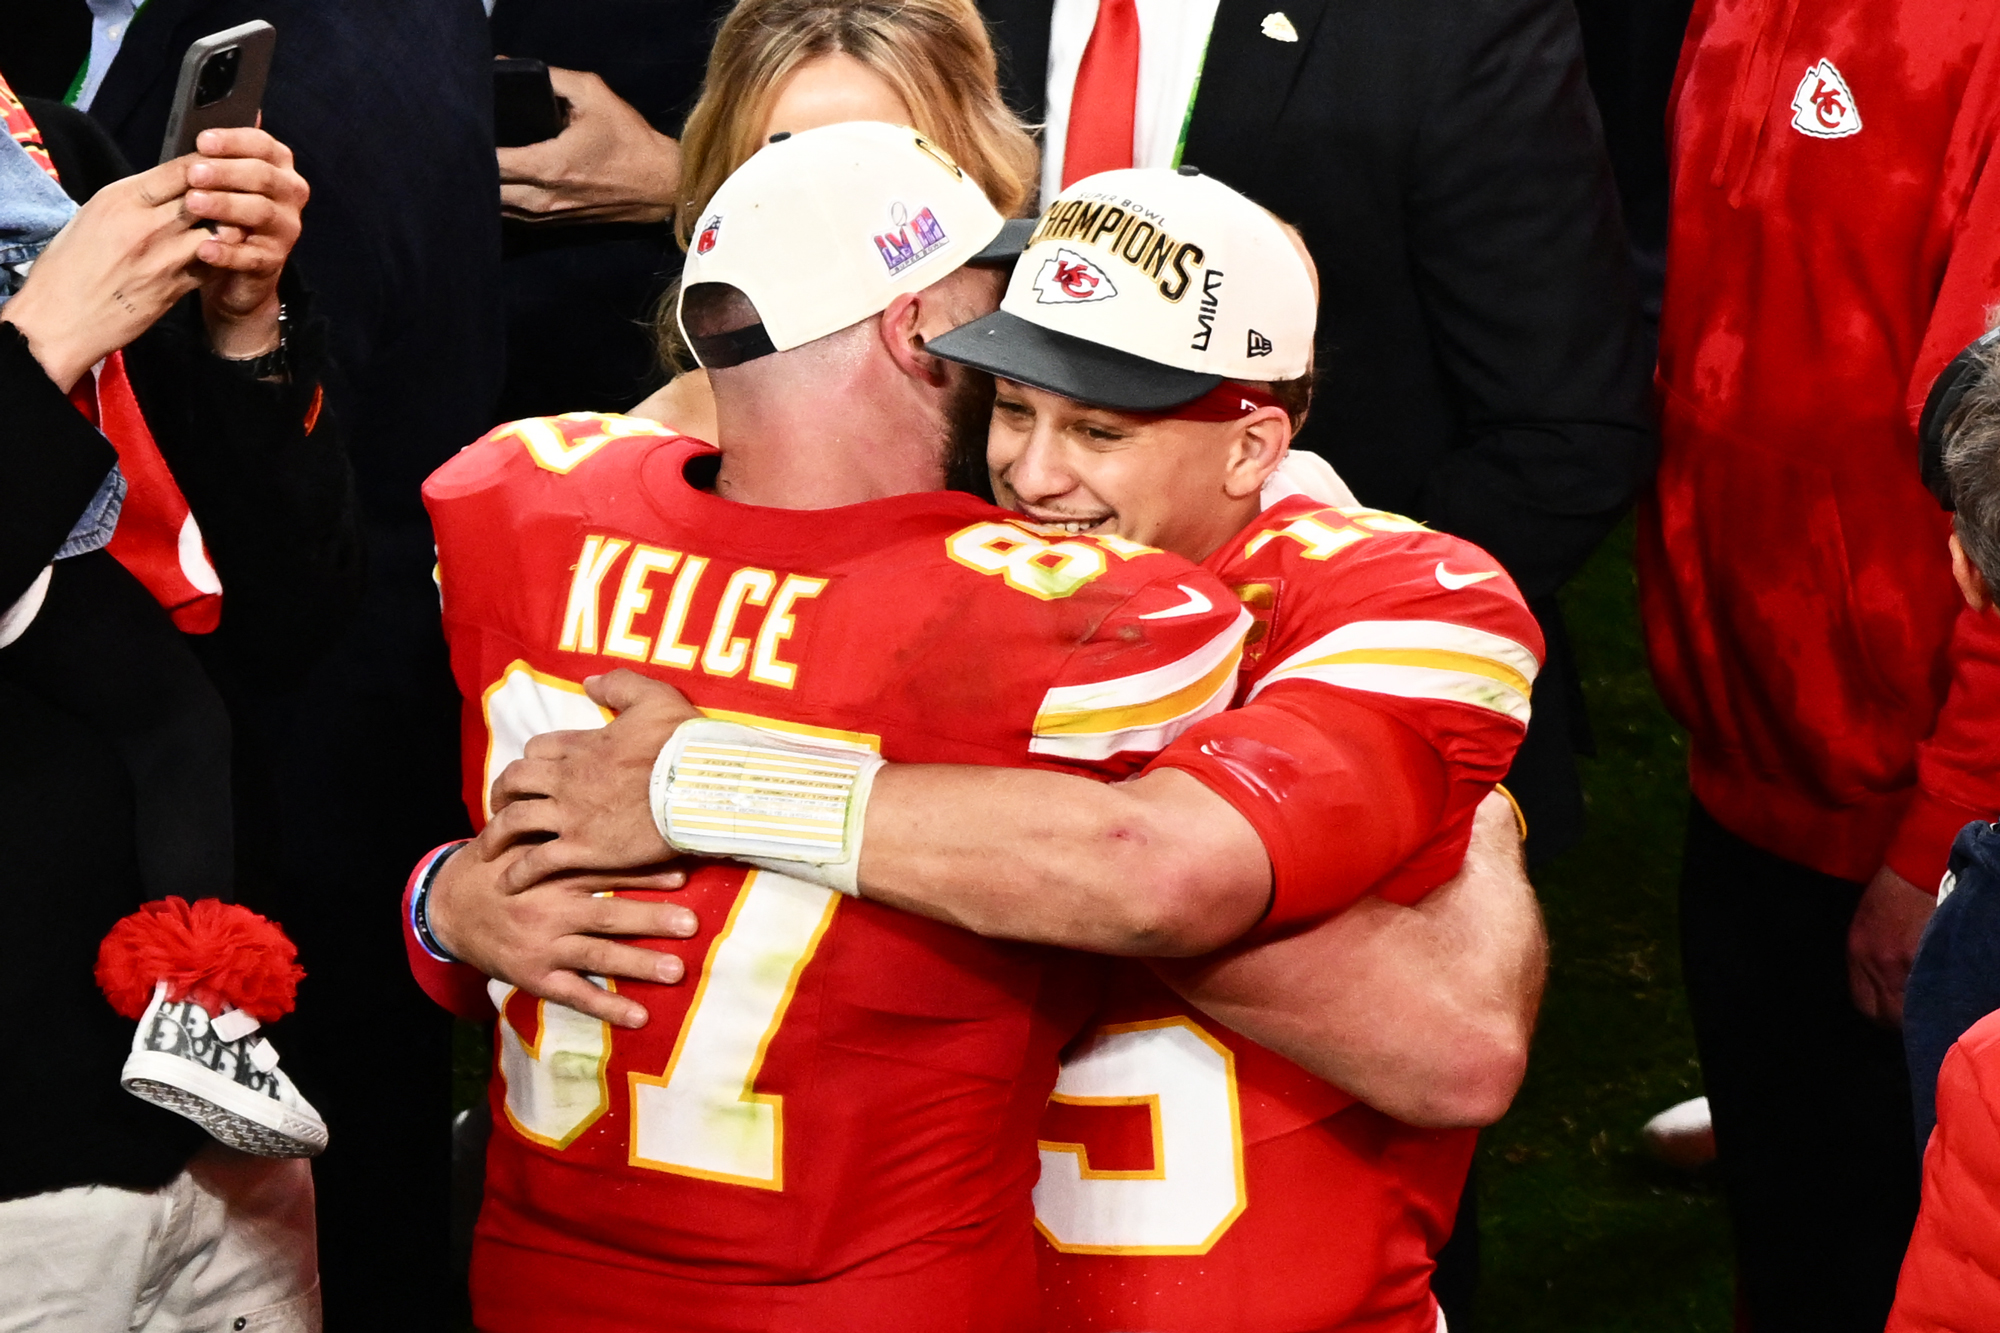 Who Is Favored To Win The Super Bowl? Kansas City Chiefs vs. San